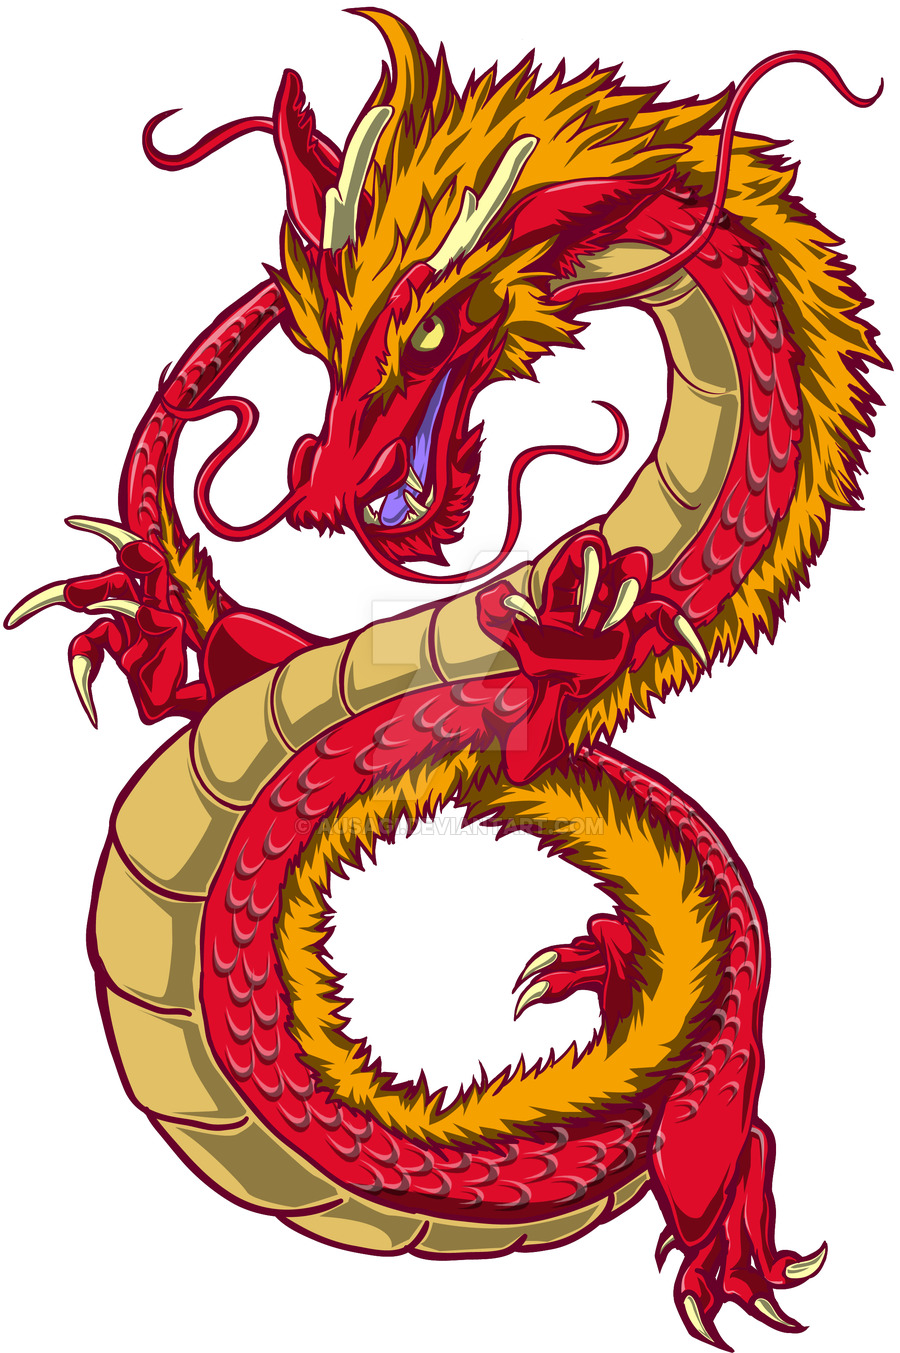 Chinese Dragon by Ausagi on DeviantArt - ClipArt Best - ClipArt Best